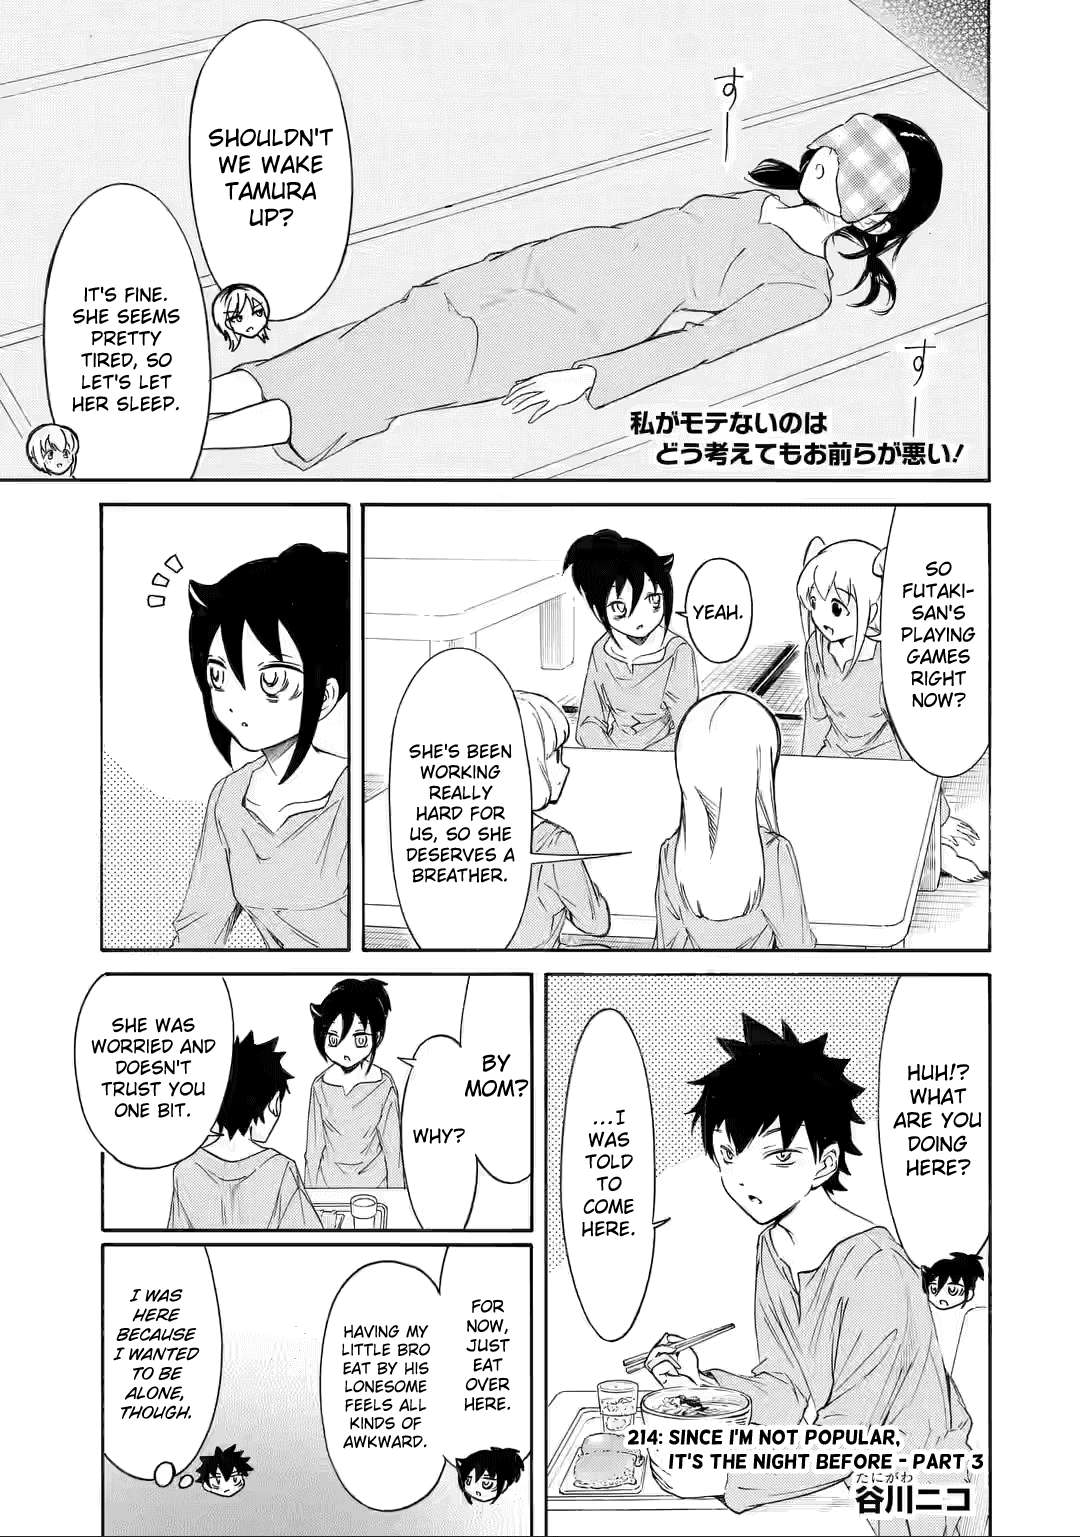 Its Not my Fault That im Not Popular - chapter 214.3 - #1